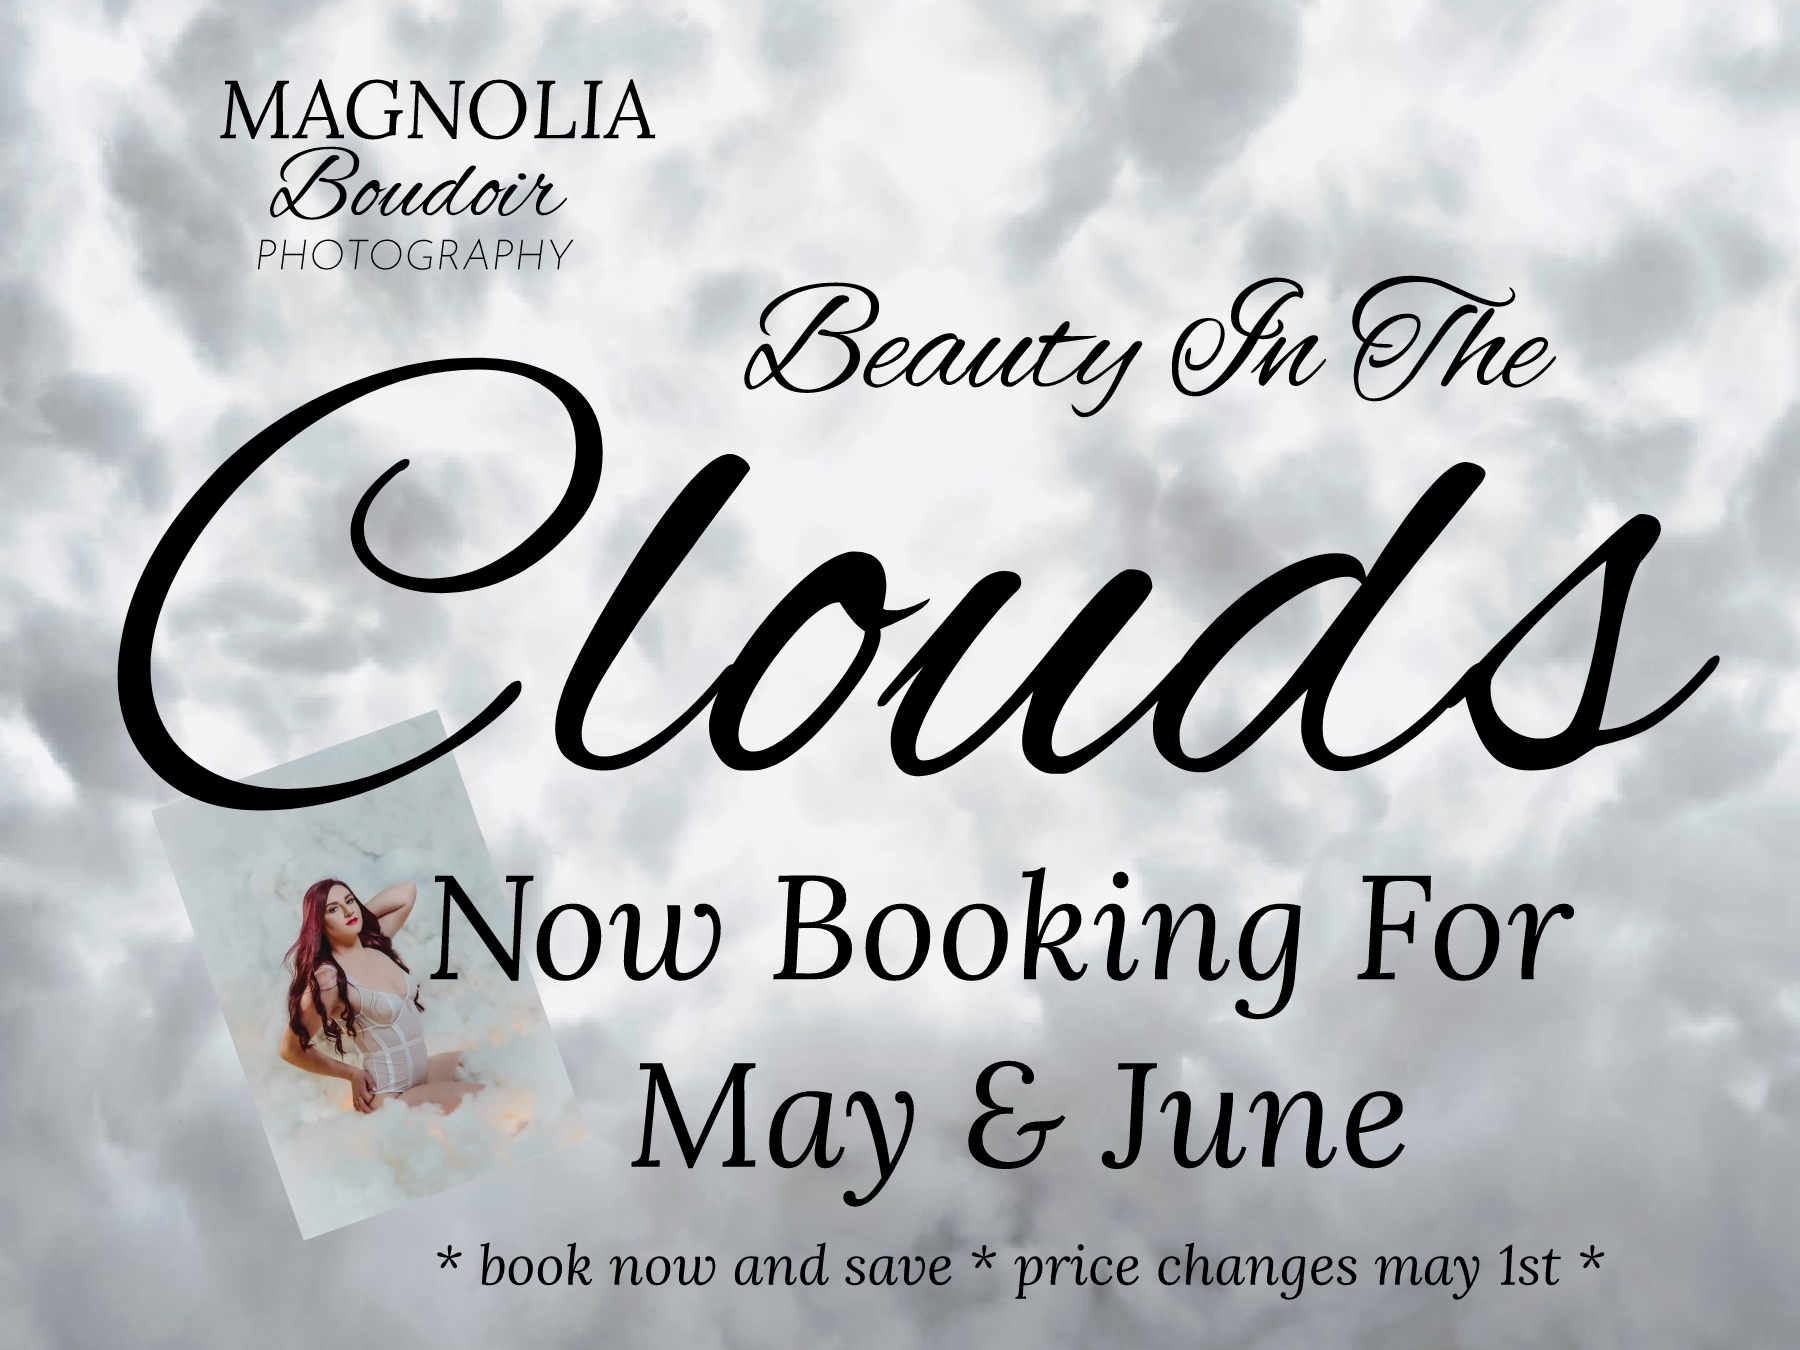 Magnolia Boudoir Photography 60428 Mt Zion Rd, Amory Mississippi 38821